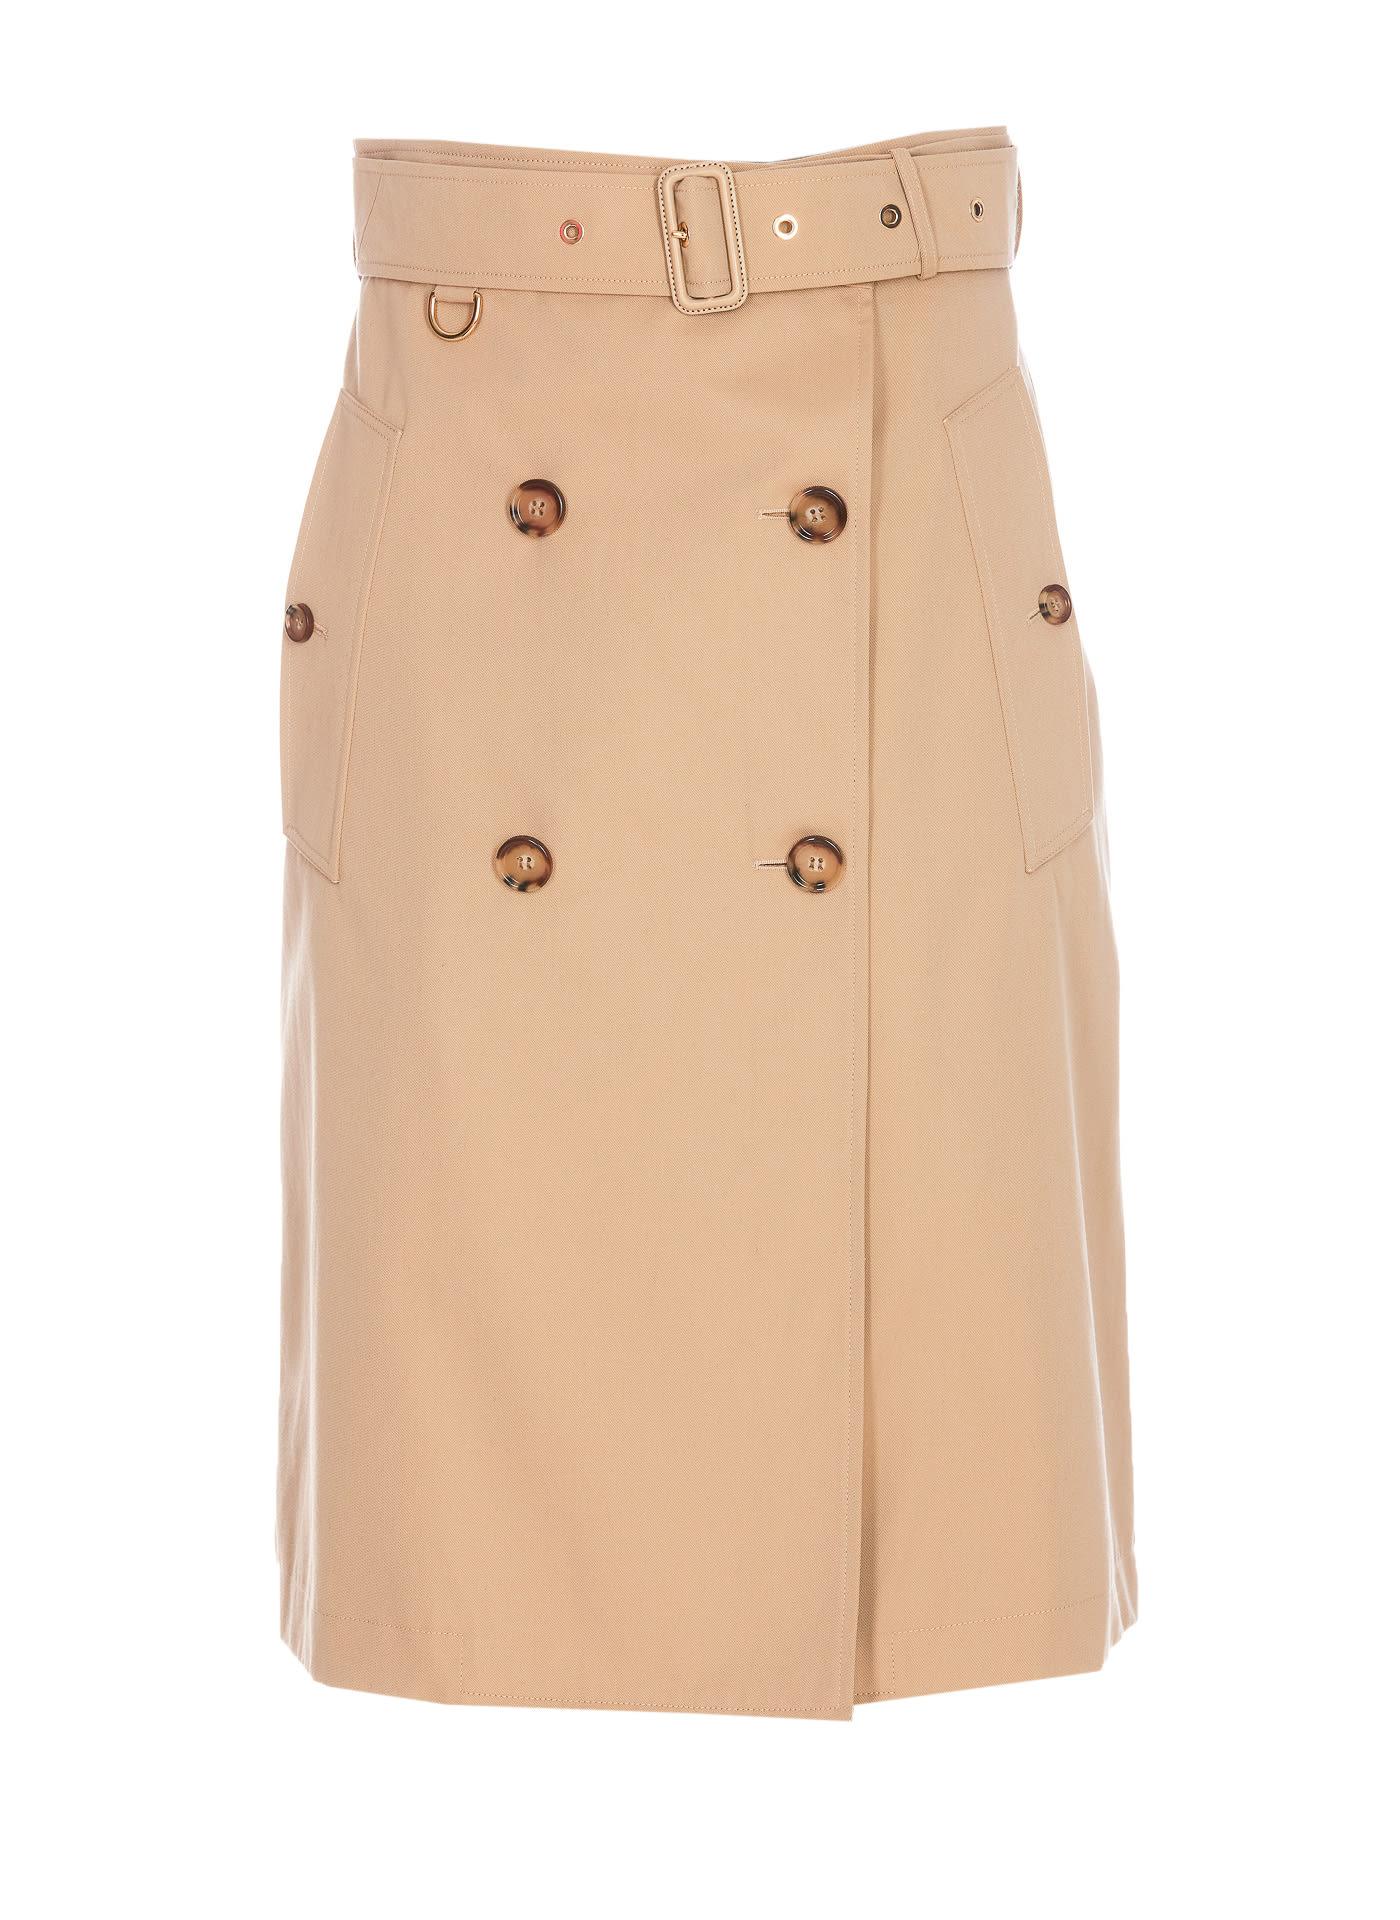 Burberry Trench Skirt in Natural | Lyst